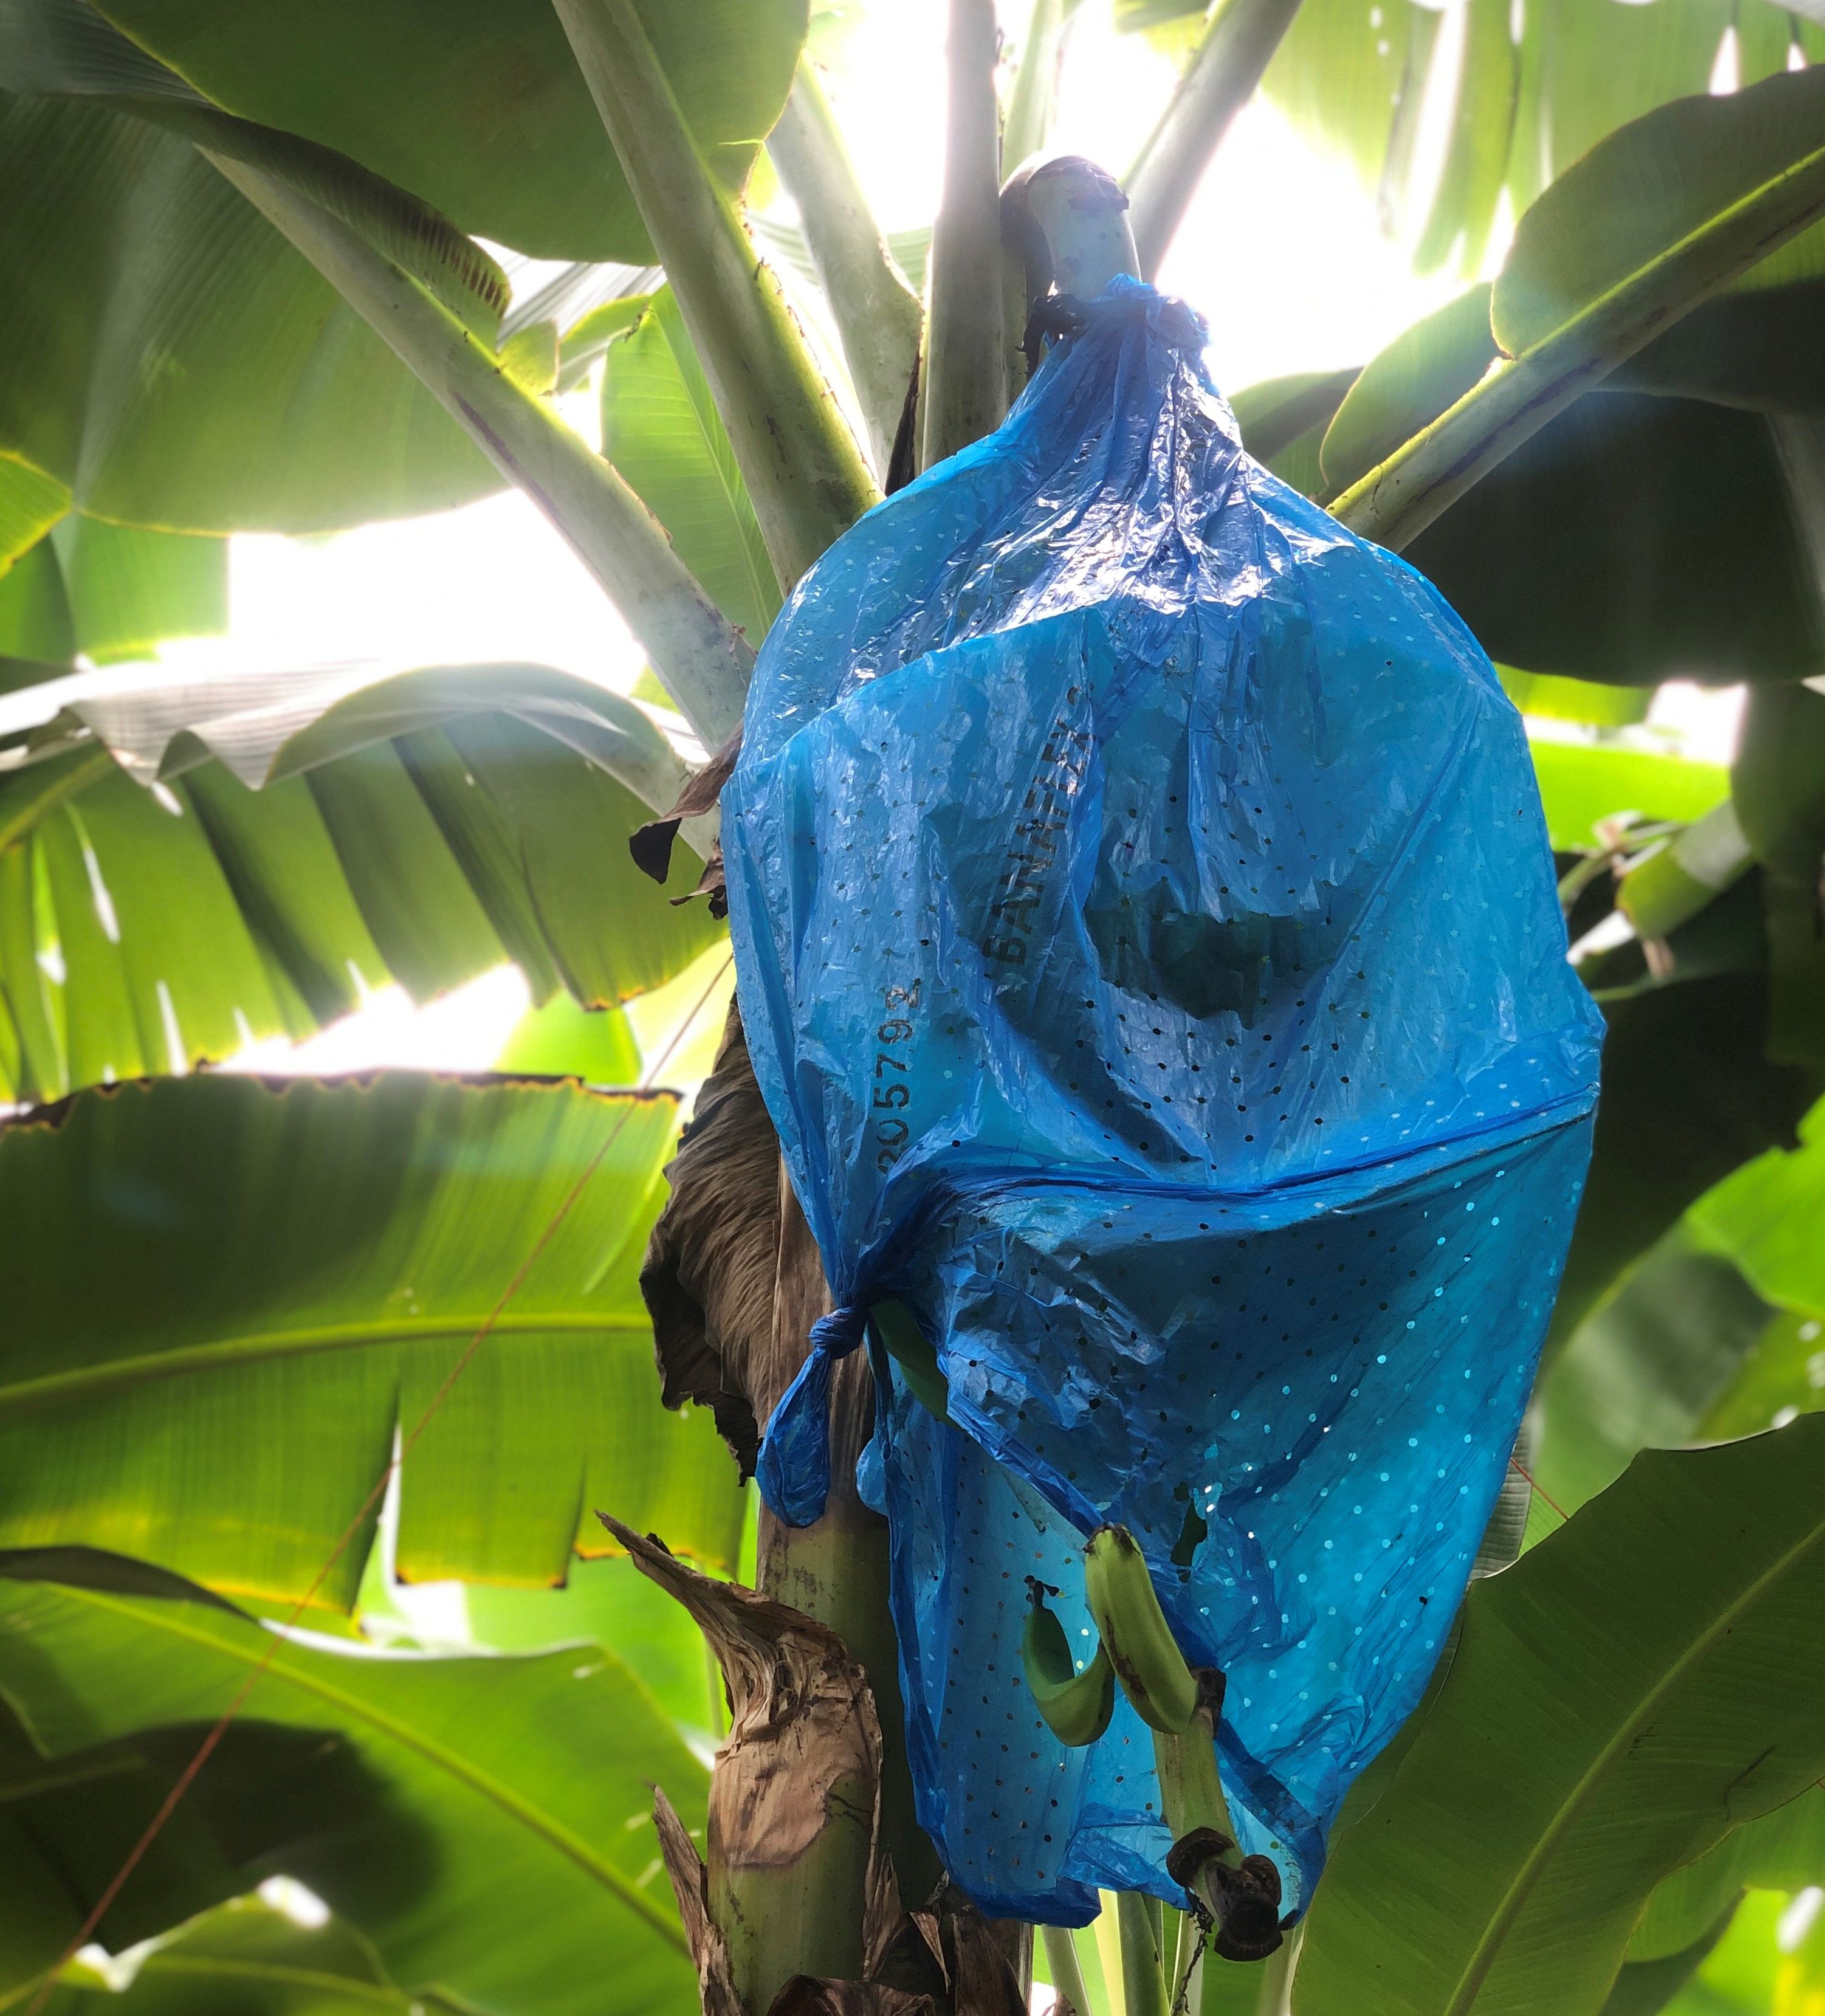 The insecticidal bags placed around the banana help protect it, but can also create hazardous air pollution for workers and the public. Image by Madison Stewart. Costa Rica, 2019.